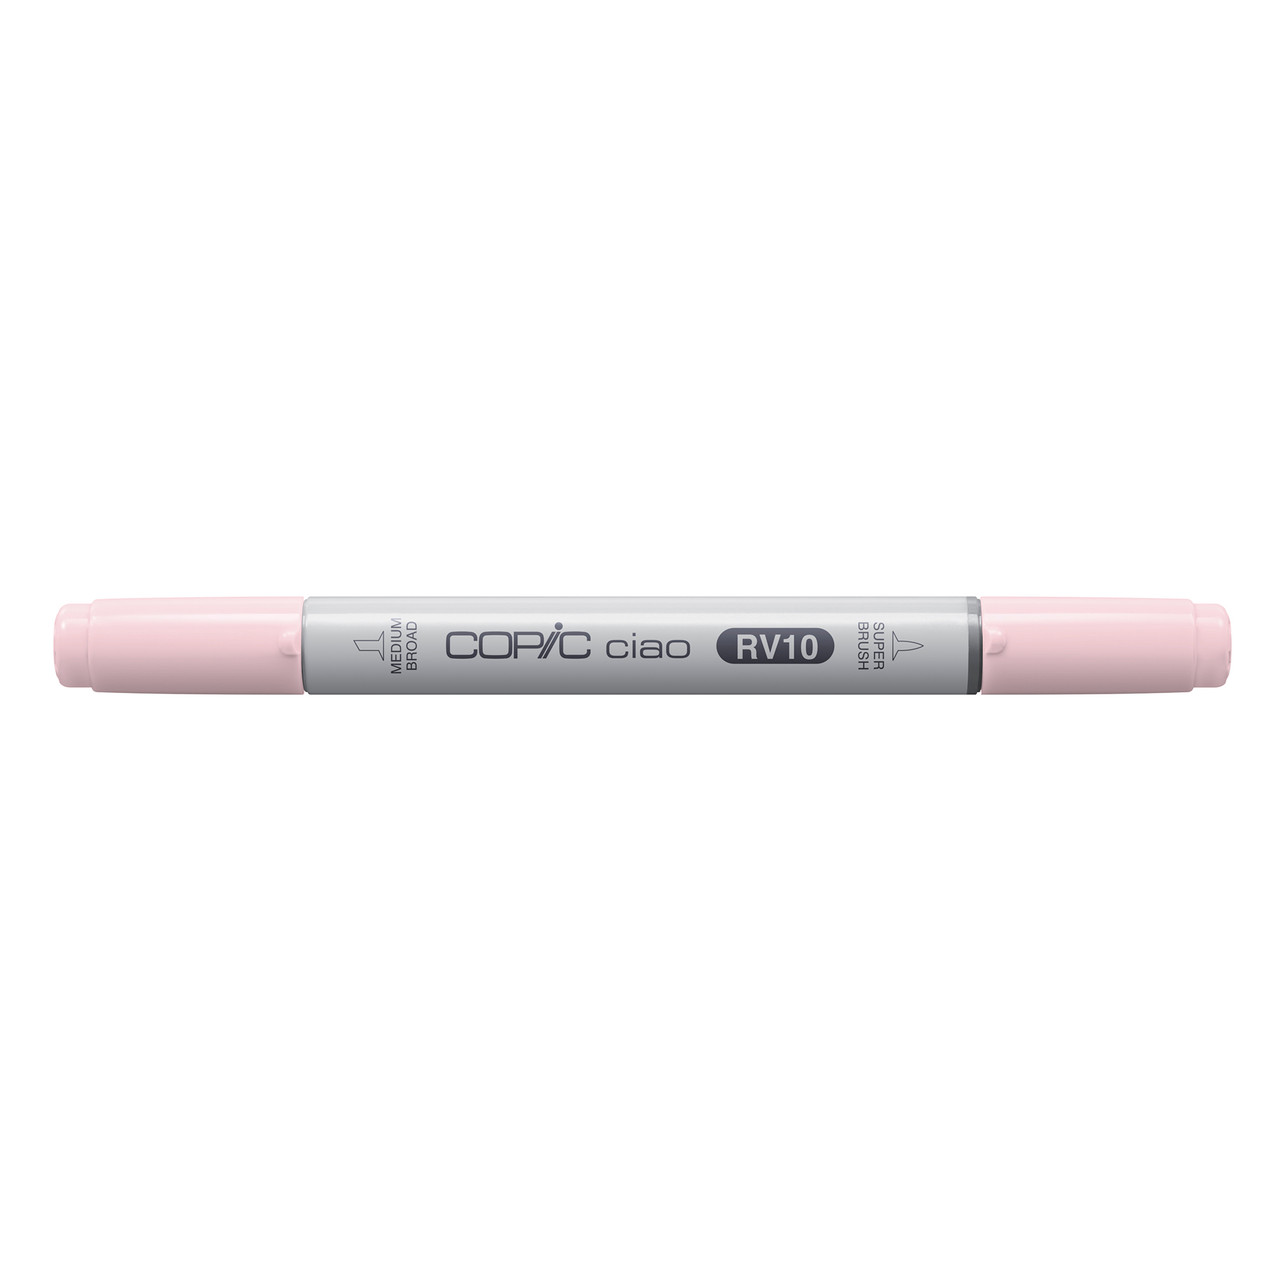 Copic Ciao Marker Pale Pink RV10